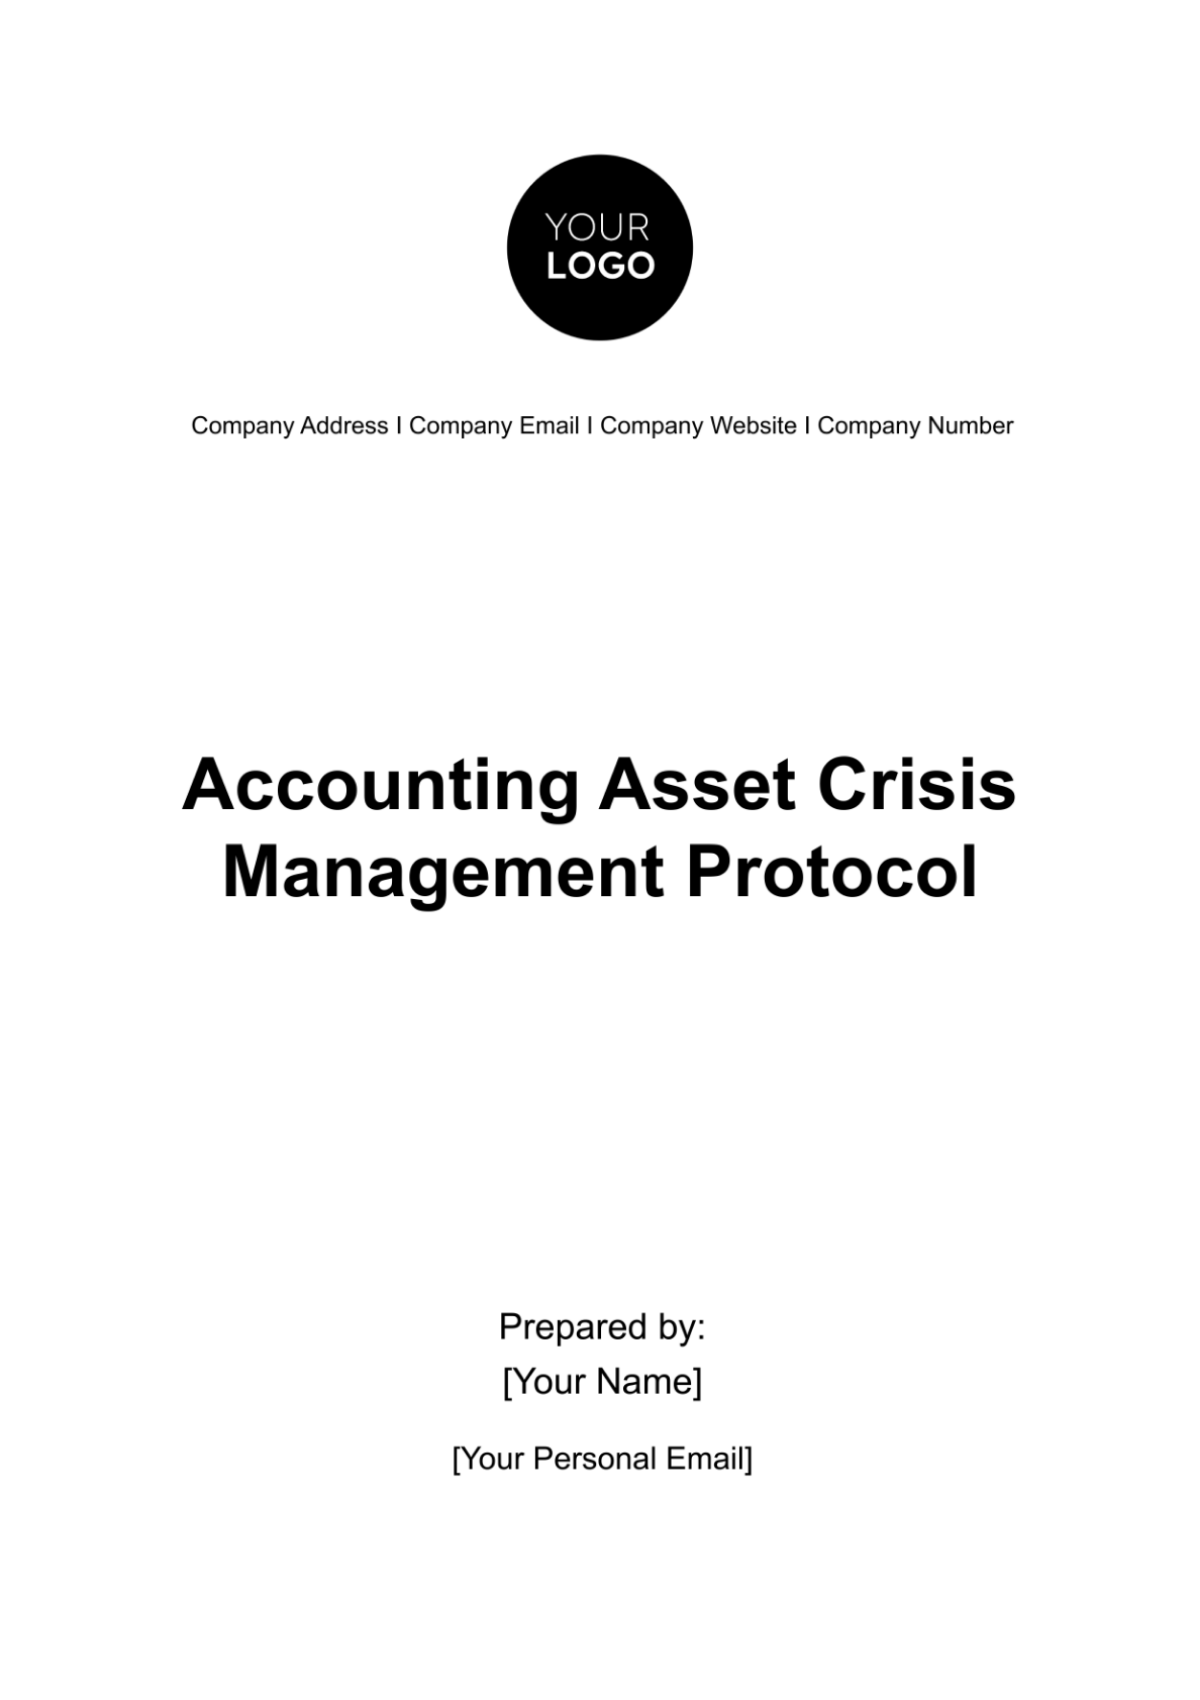 Accounting Asset Crisis Management Protocol Template